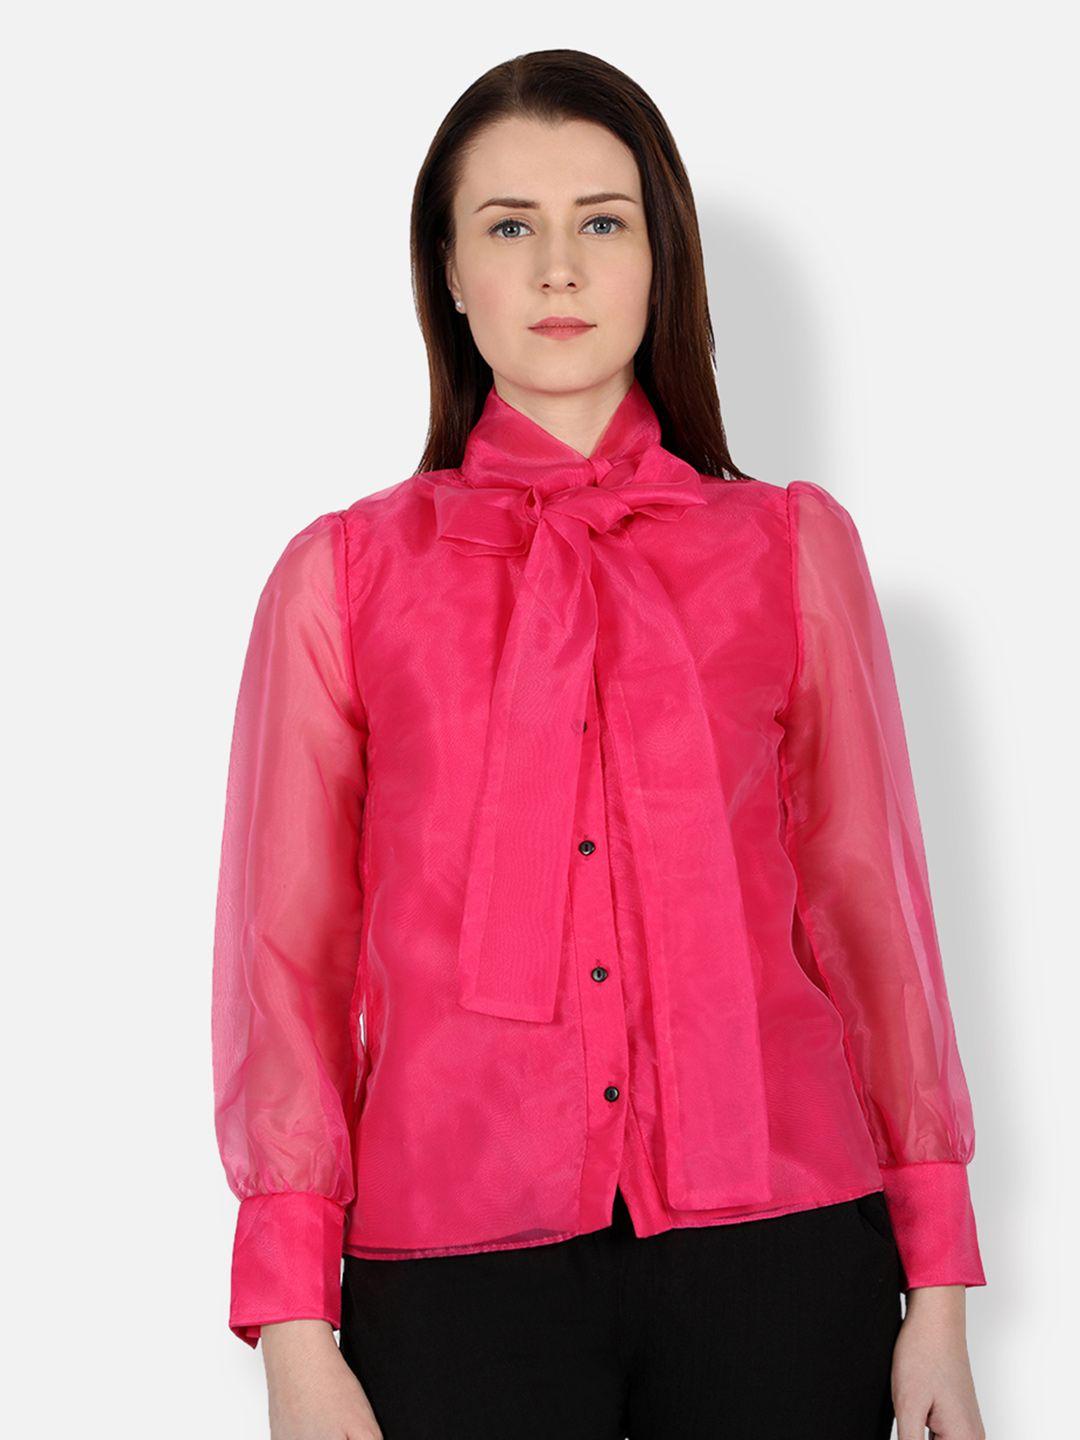 ashtag pink tie-up neck net shirt style top